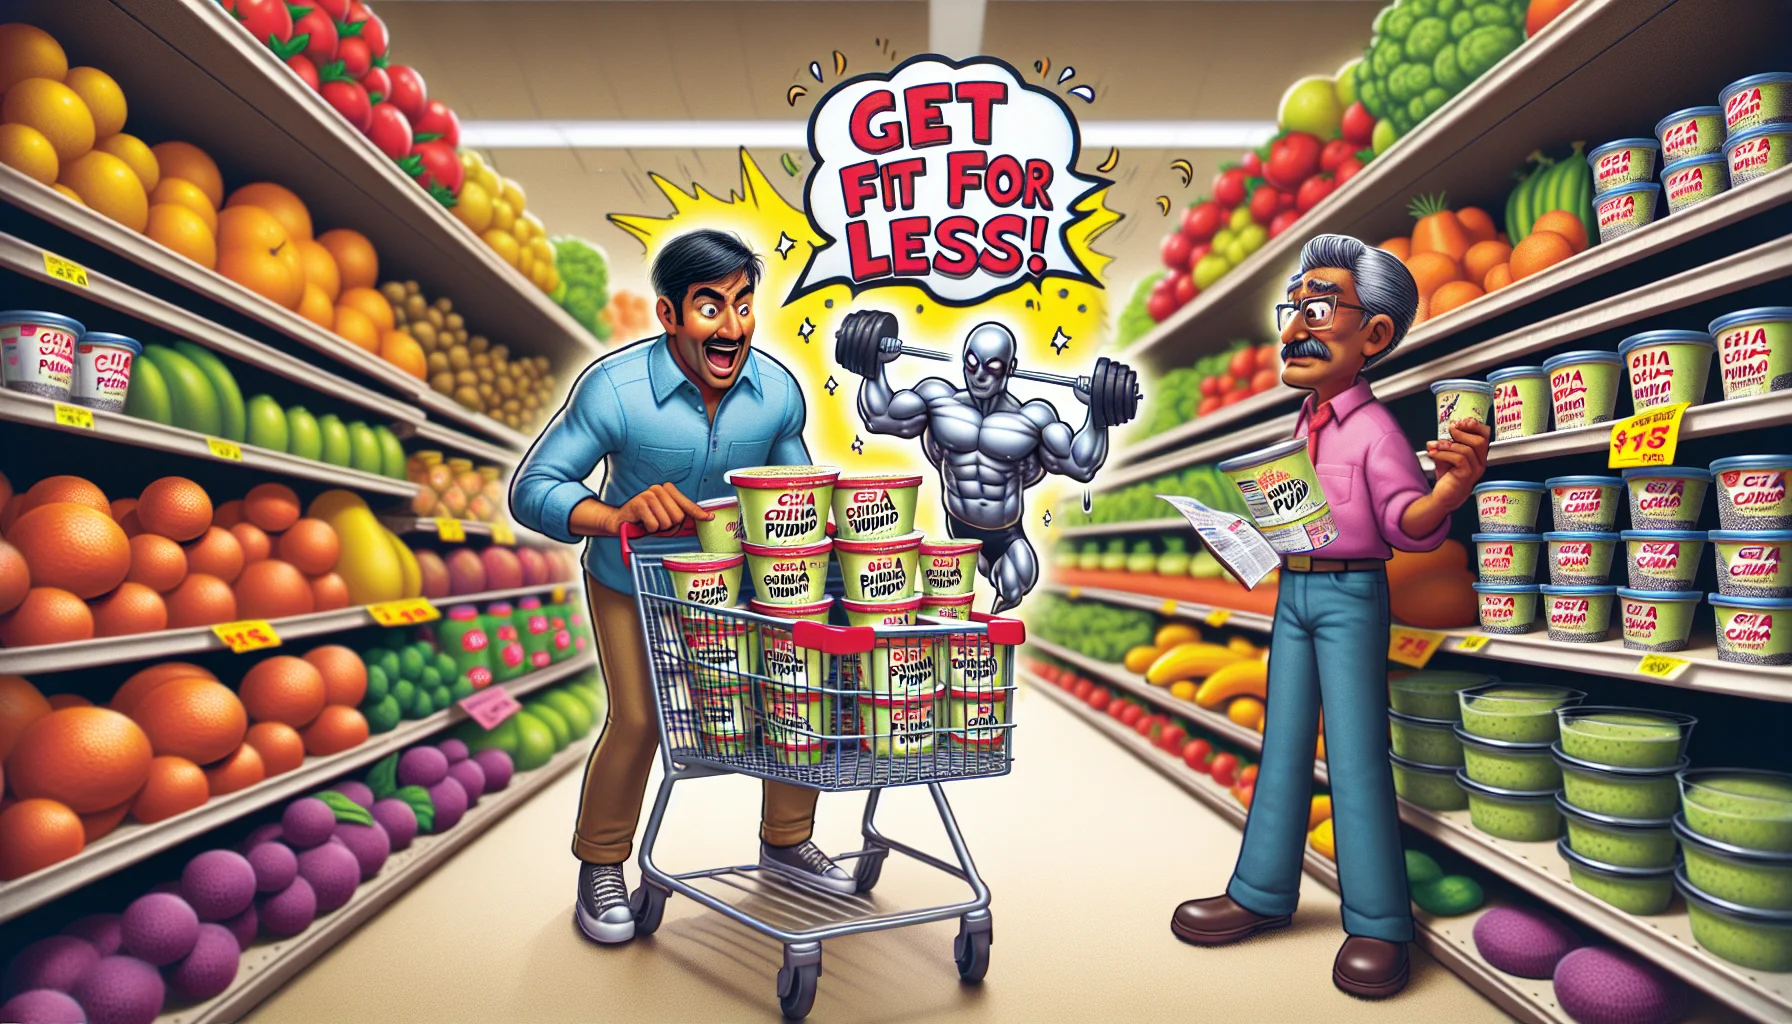 A humorous yet realistic scene unfolding in a grocery store. A South Asian male customer perusing the aisles spots a flashy price tag on a tub of chia pudding that reads, 'Get Fit for Less!' Next to the pudding, a small sign illustrates the low calorie count in a playful, cartoonish style, resembling a fitness-geared superhero lifting a barbell labeled 'Chia Pudding'. The customer, wearing an expression of delighted surprise, is adding several tubs of the pudding to his shopping cart. Around them, the grocery store is filled with colorful fruits, vegetables, and other healthy food items.